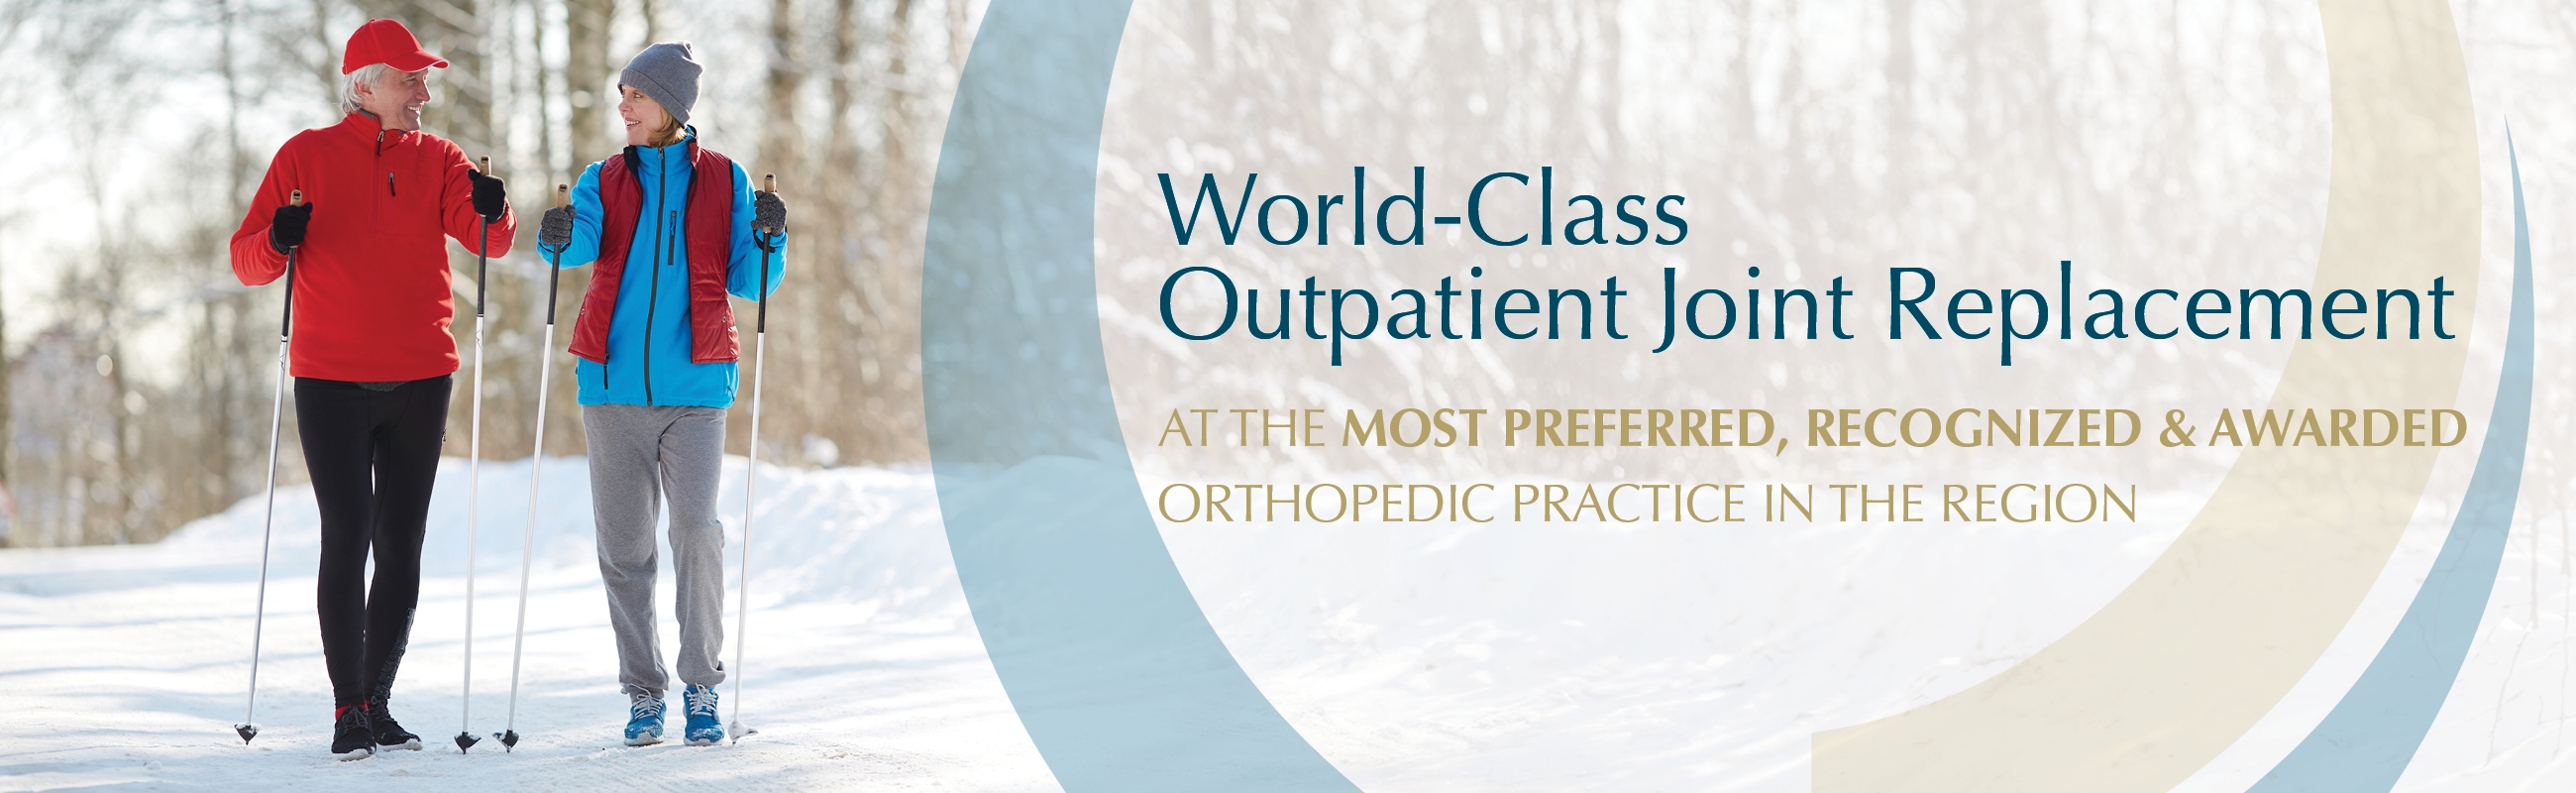 World-Class Outpatient Joint Replacement